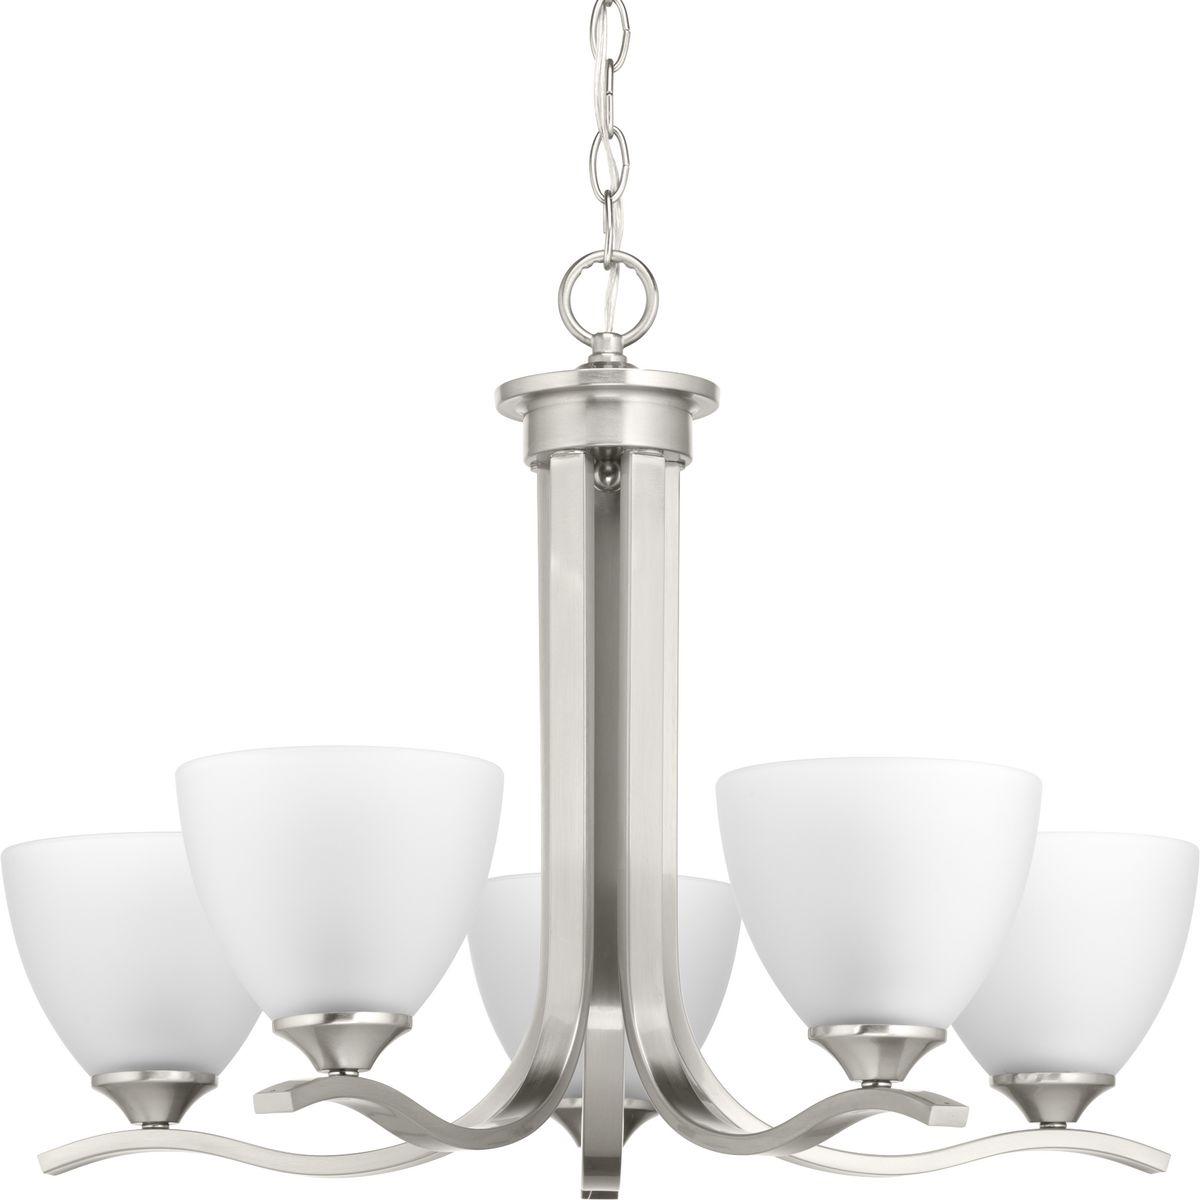 Hubbell P400063-009 The Laird collection provides a contemporary complement to casual interiors popular in today's homes. Glass shades add distinction and provide pleasing illumination to any room, while scrolling arms create an airy effect. Five-light chandelier in an Brush